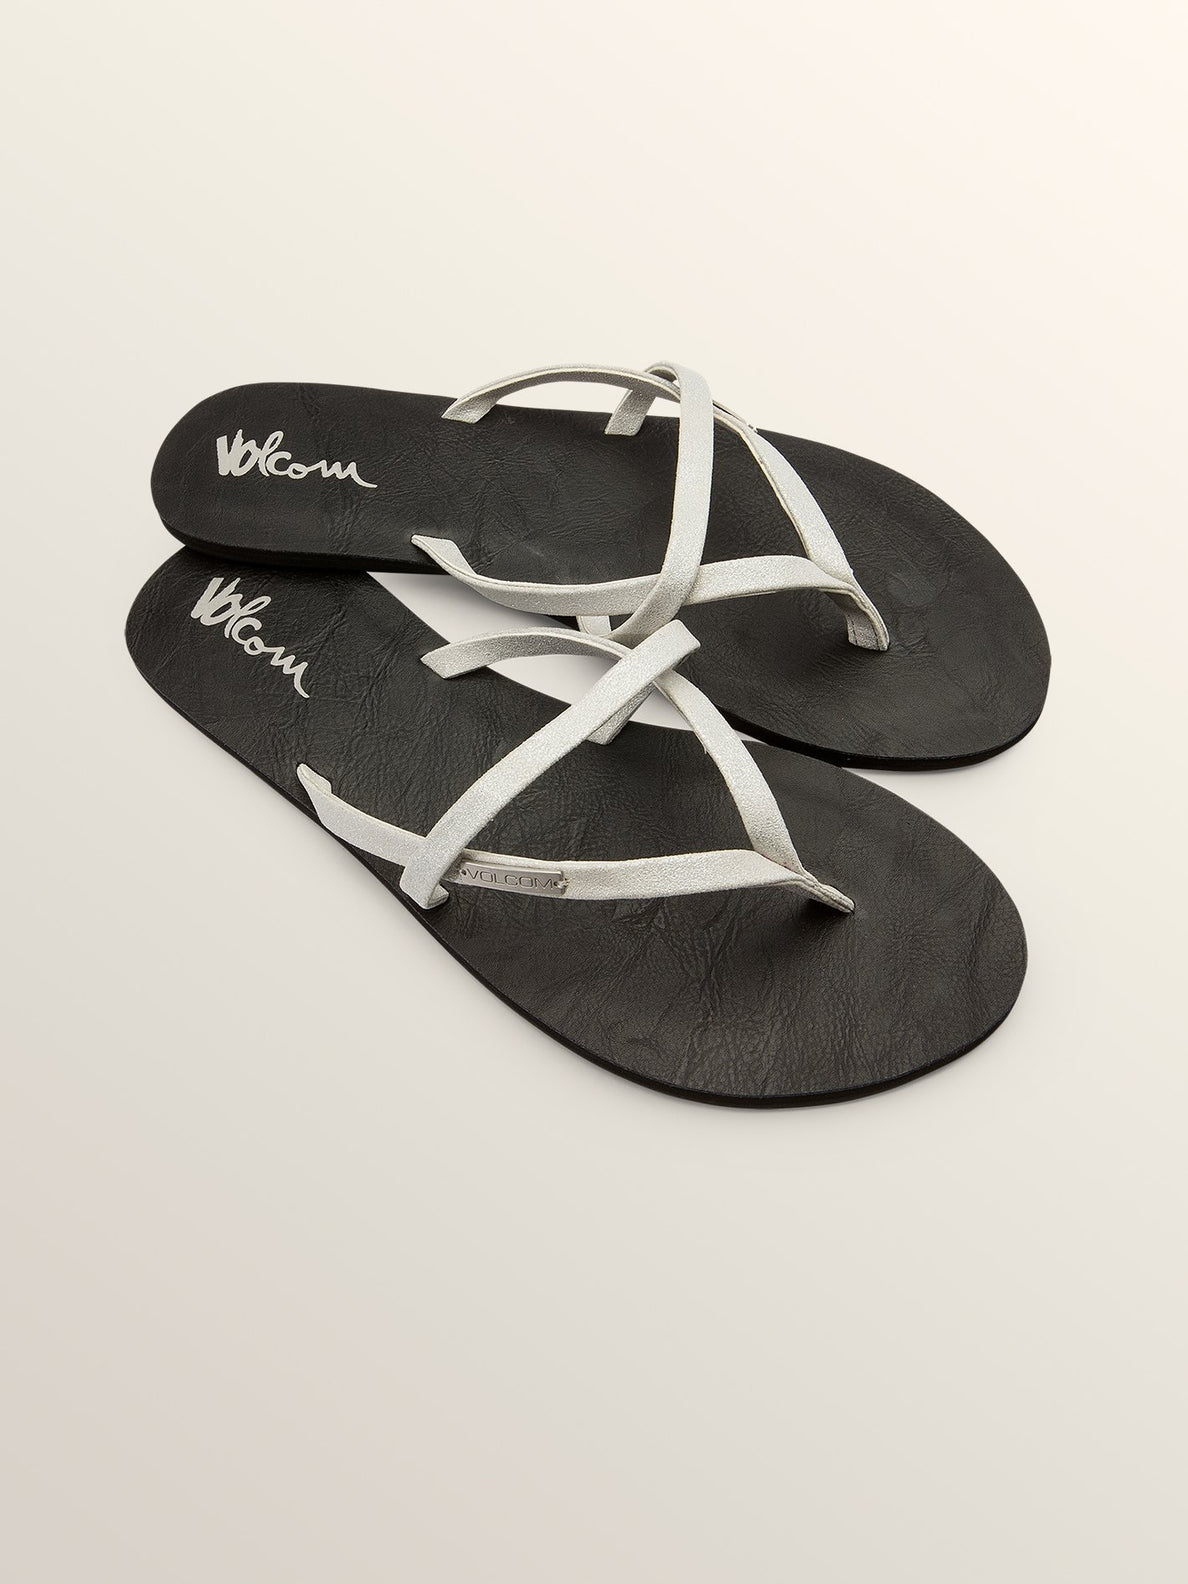 All Night Long Sandals - Silver